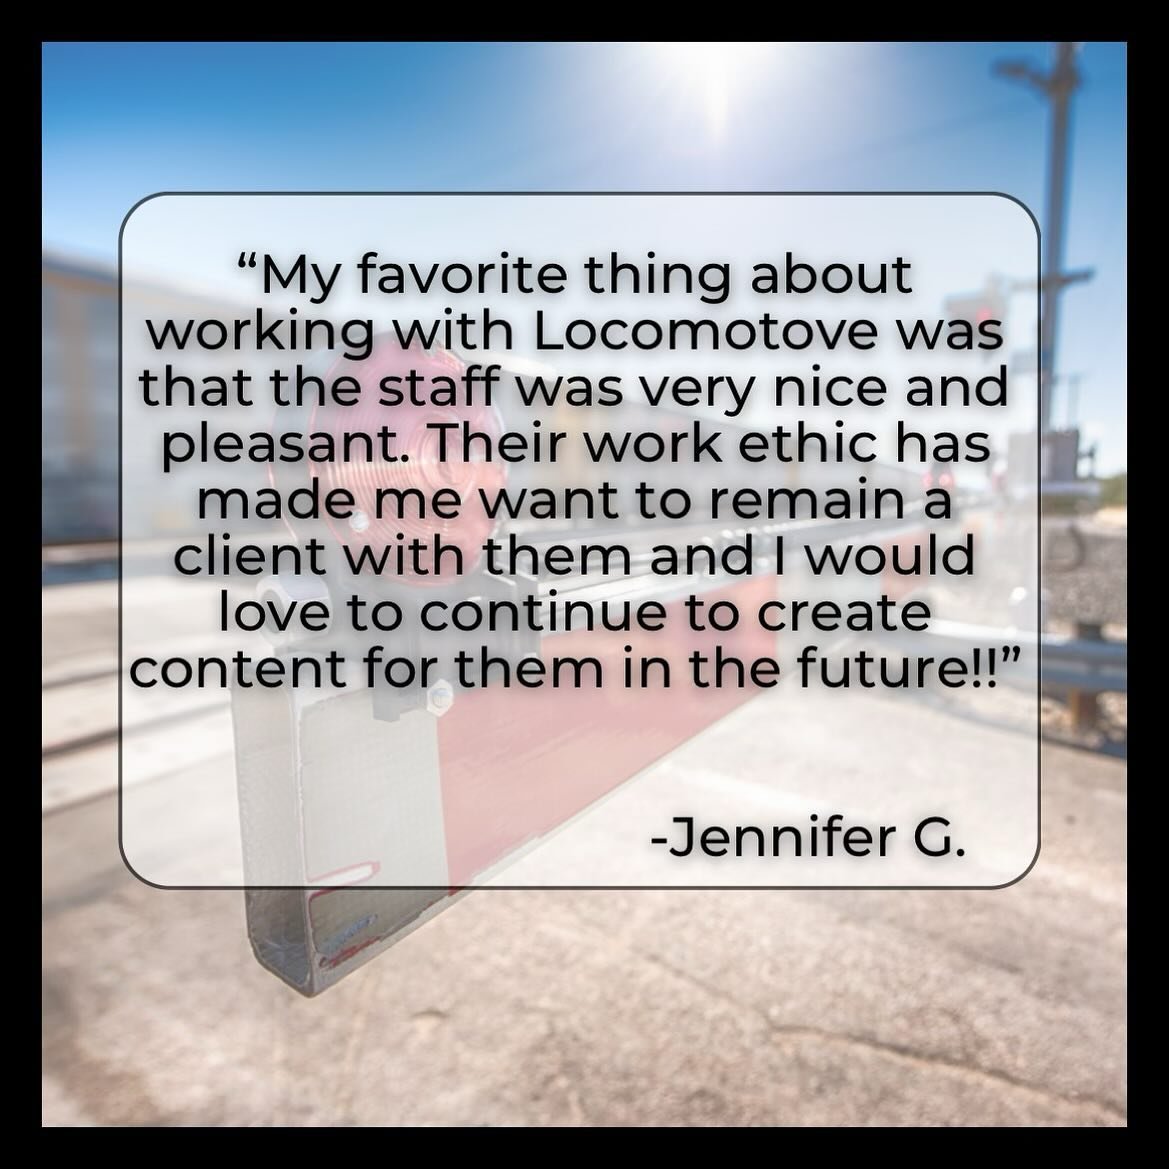 Another stellar review from our content creators! What a great way to start our Friday and finish out the week! Thanks for allow us to work with you Jennifer! 

#ugc #creatoreconomy #contentcreatorsofinstagram #ugccommunity #locomotivecontent #advert